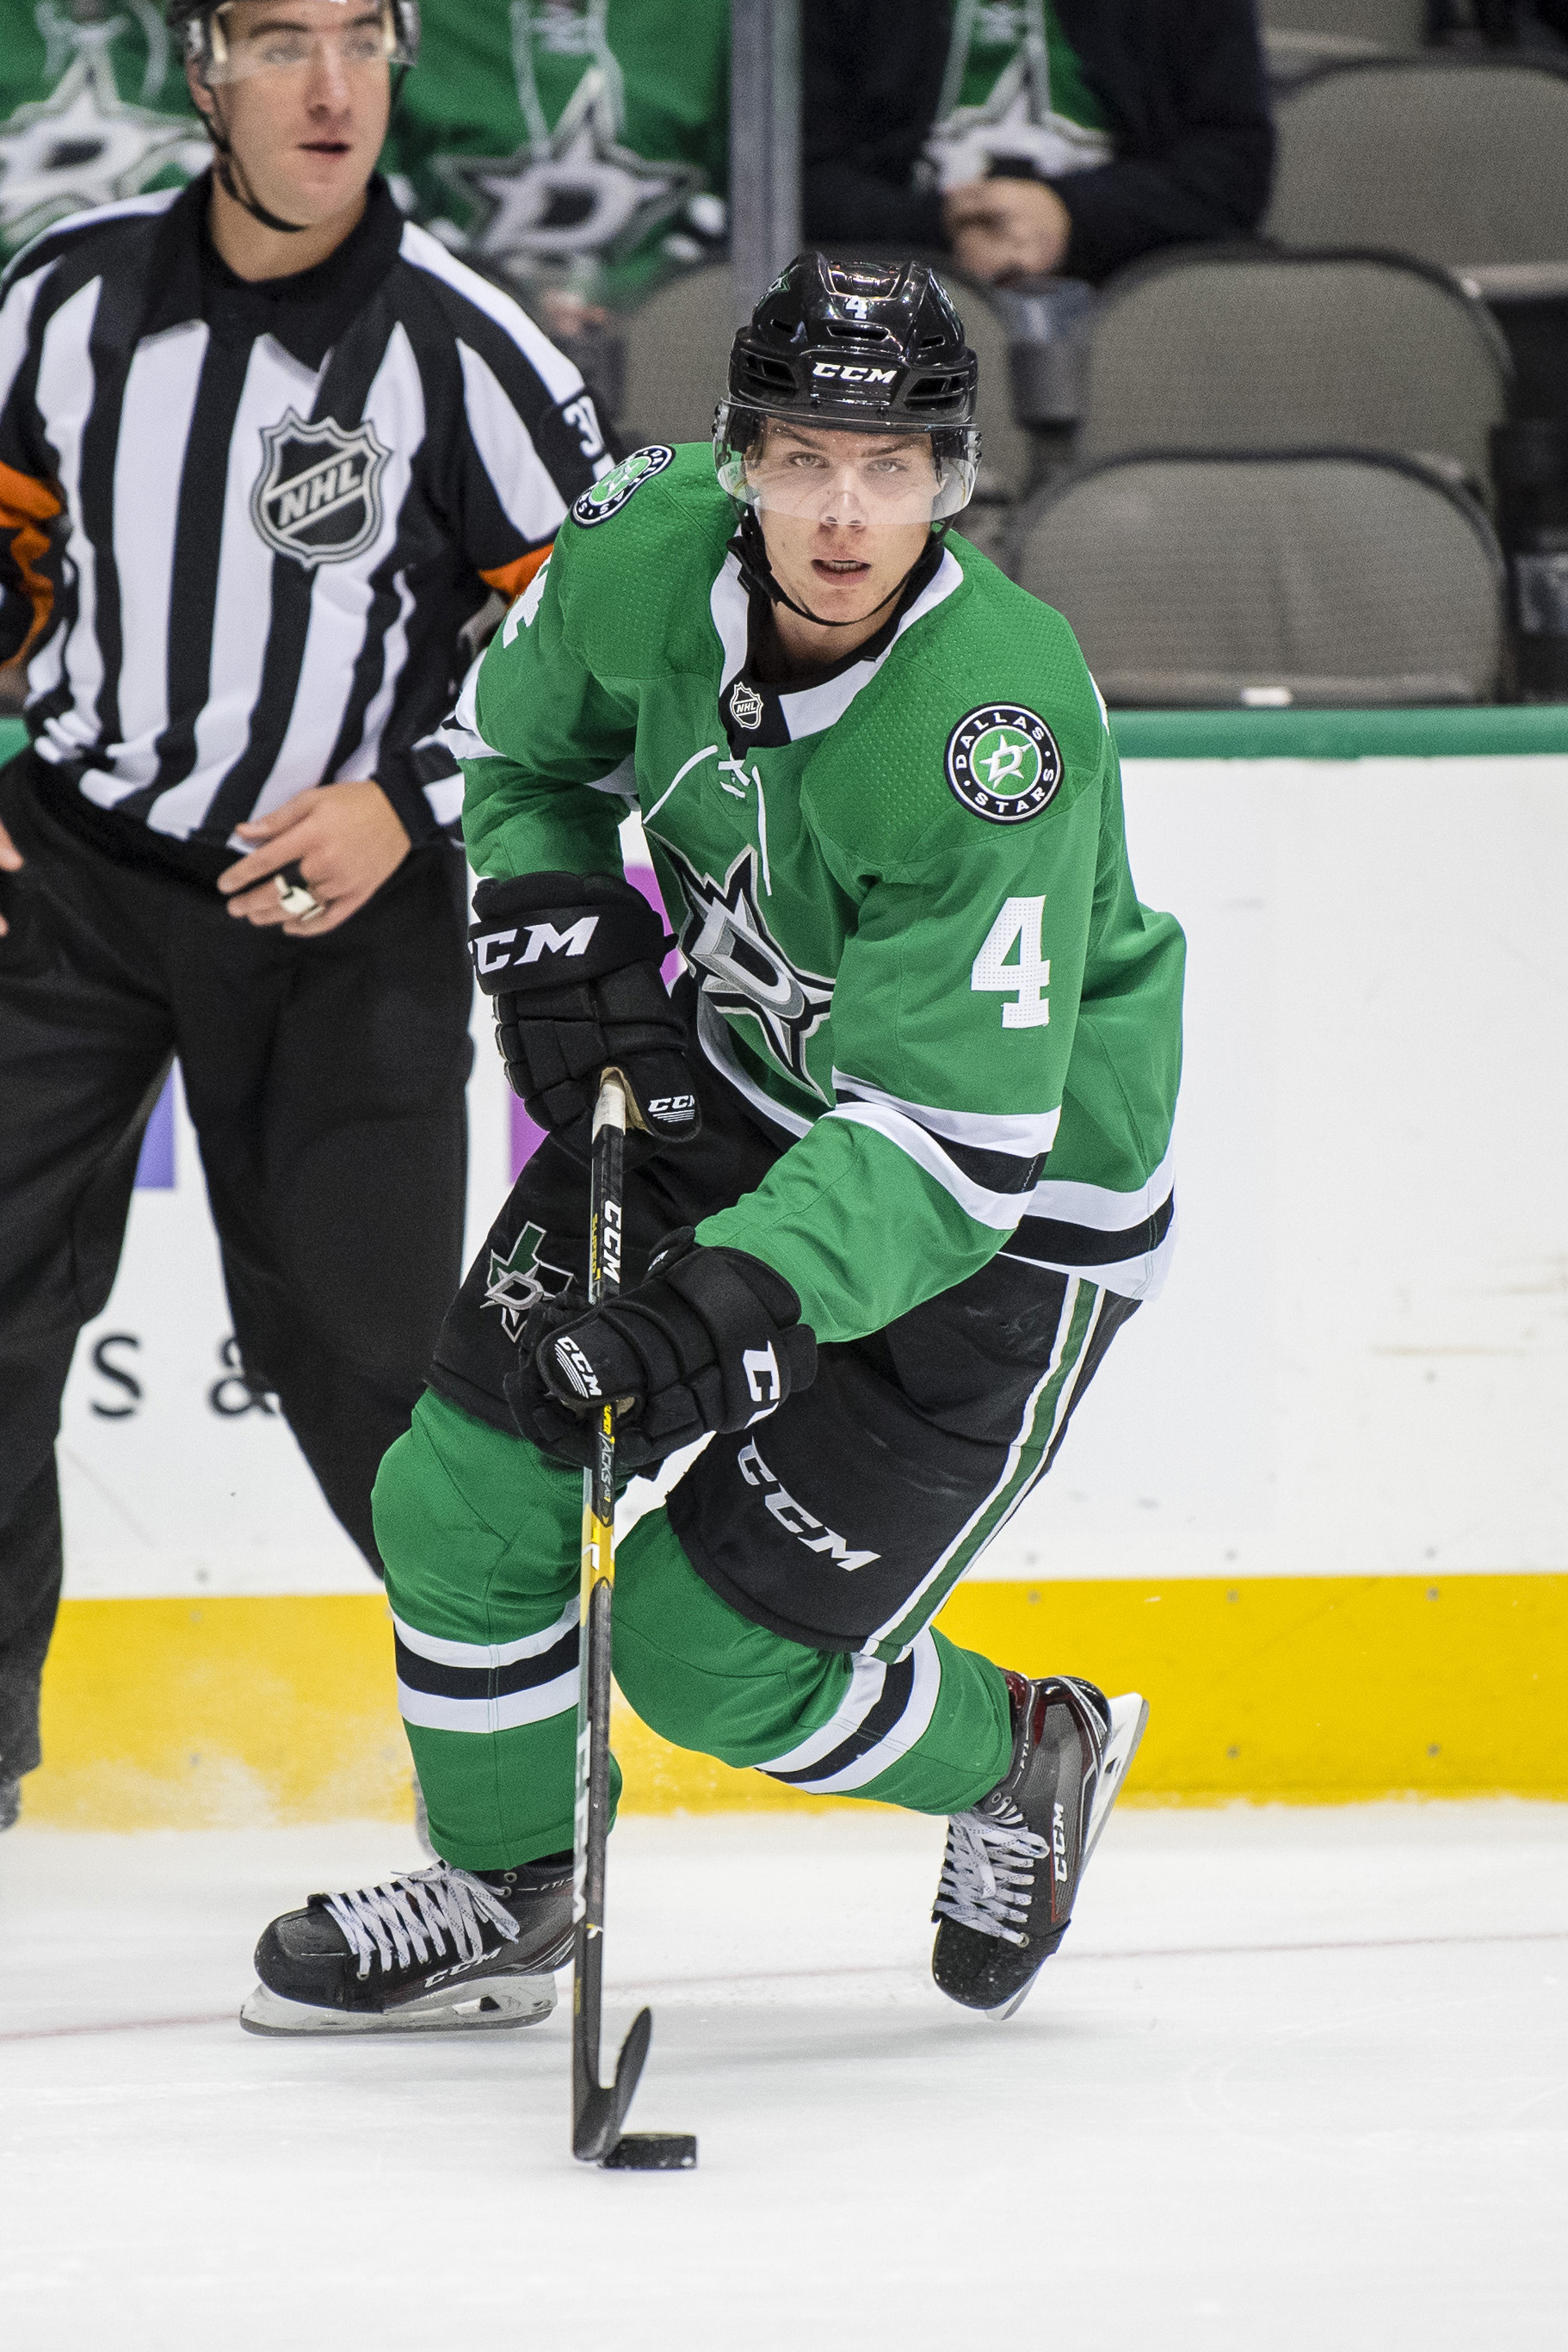 Dallas Stars, Gurianov Agree to One-Year Extension